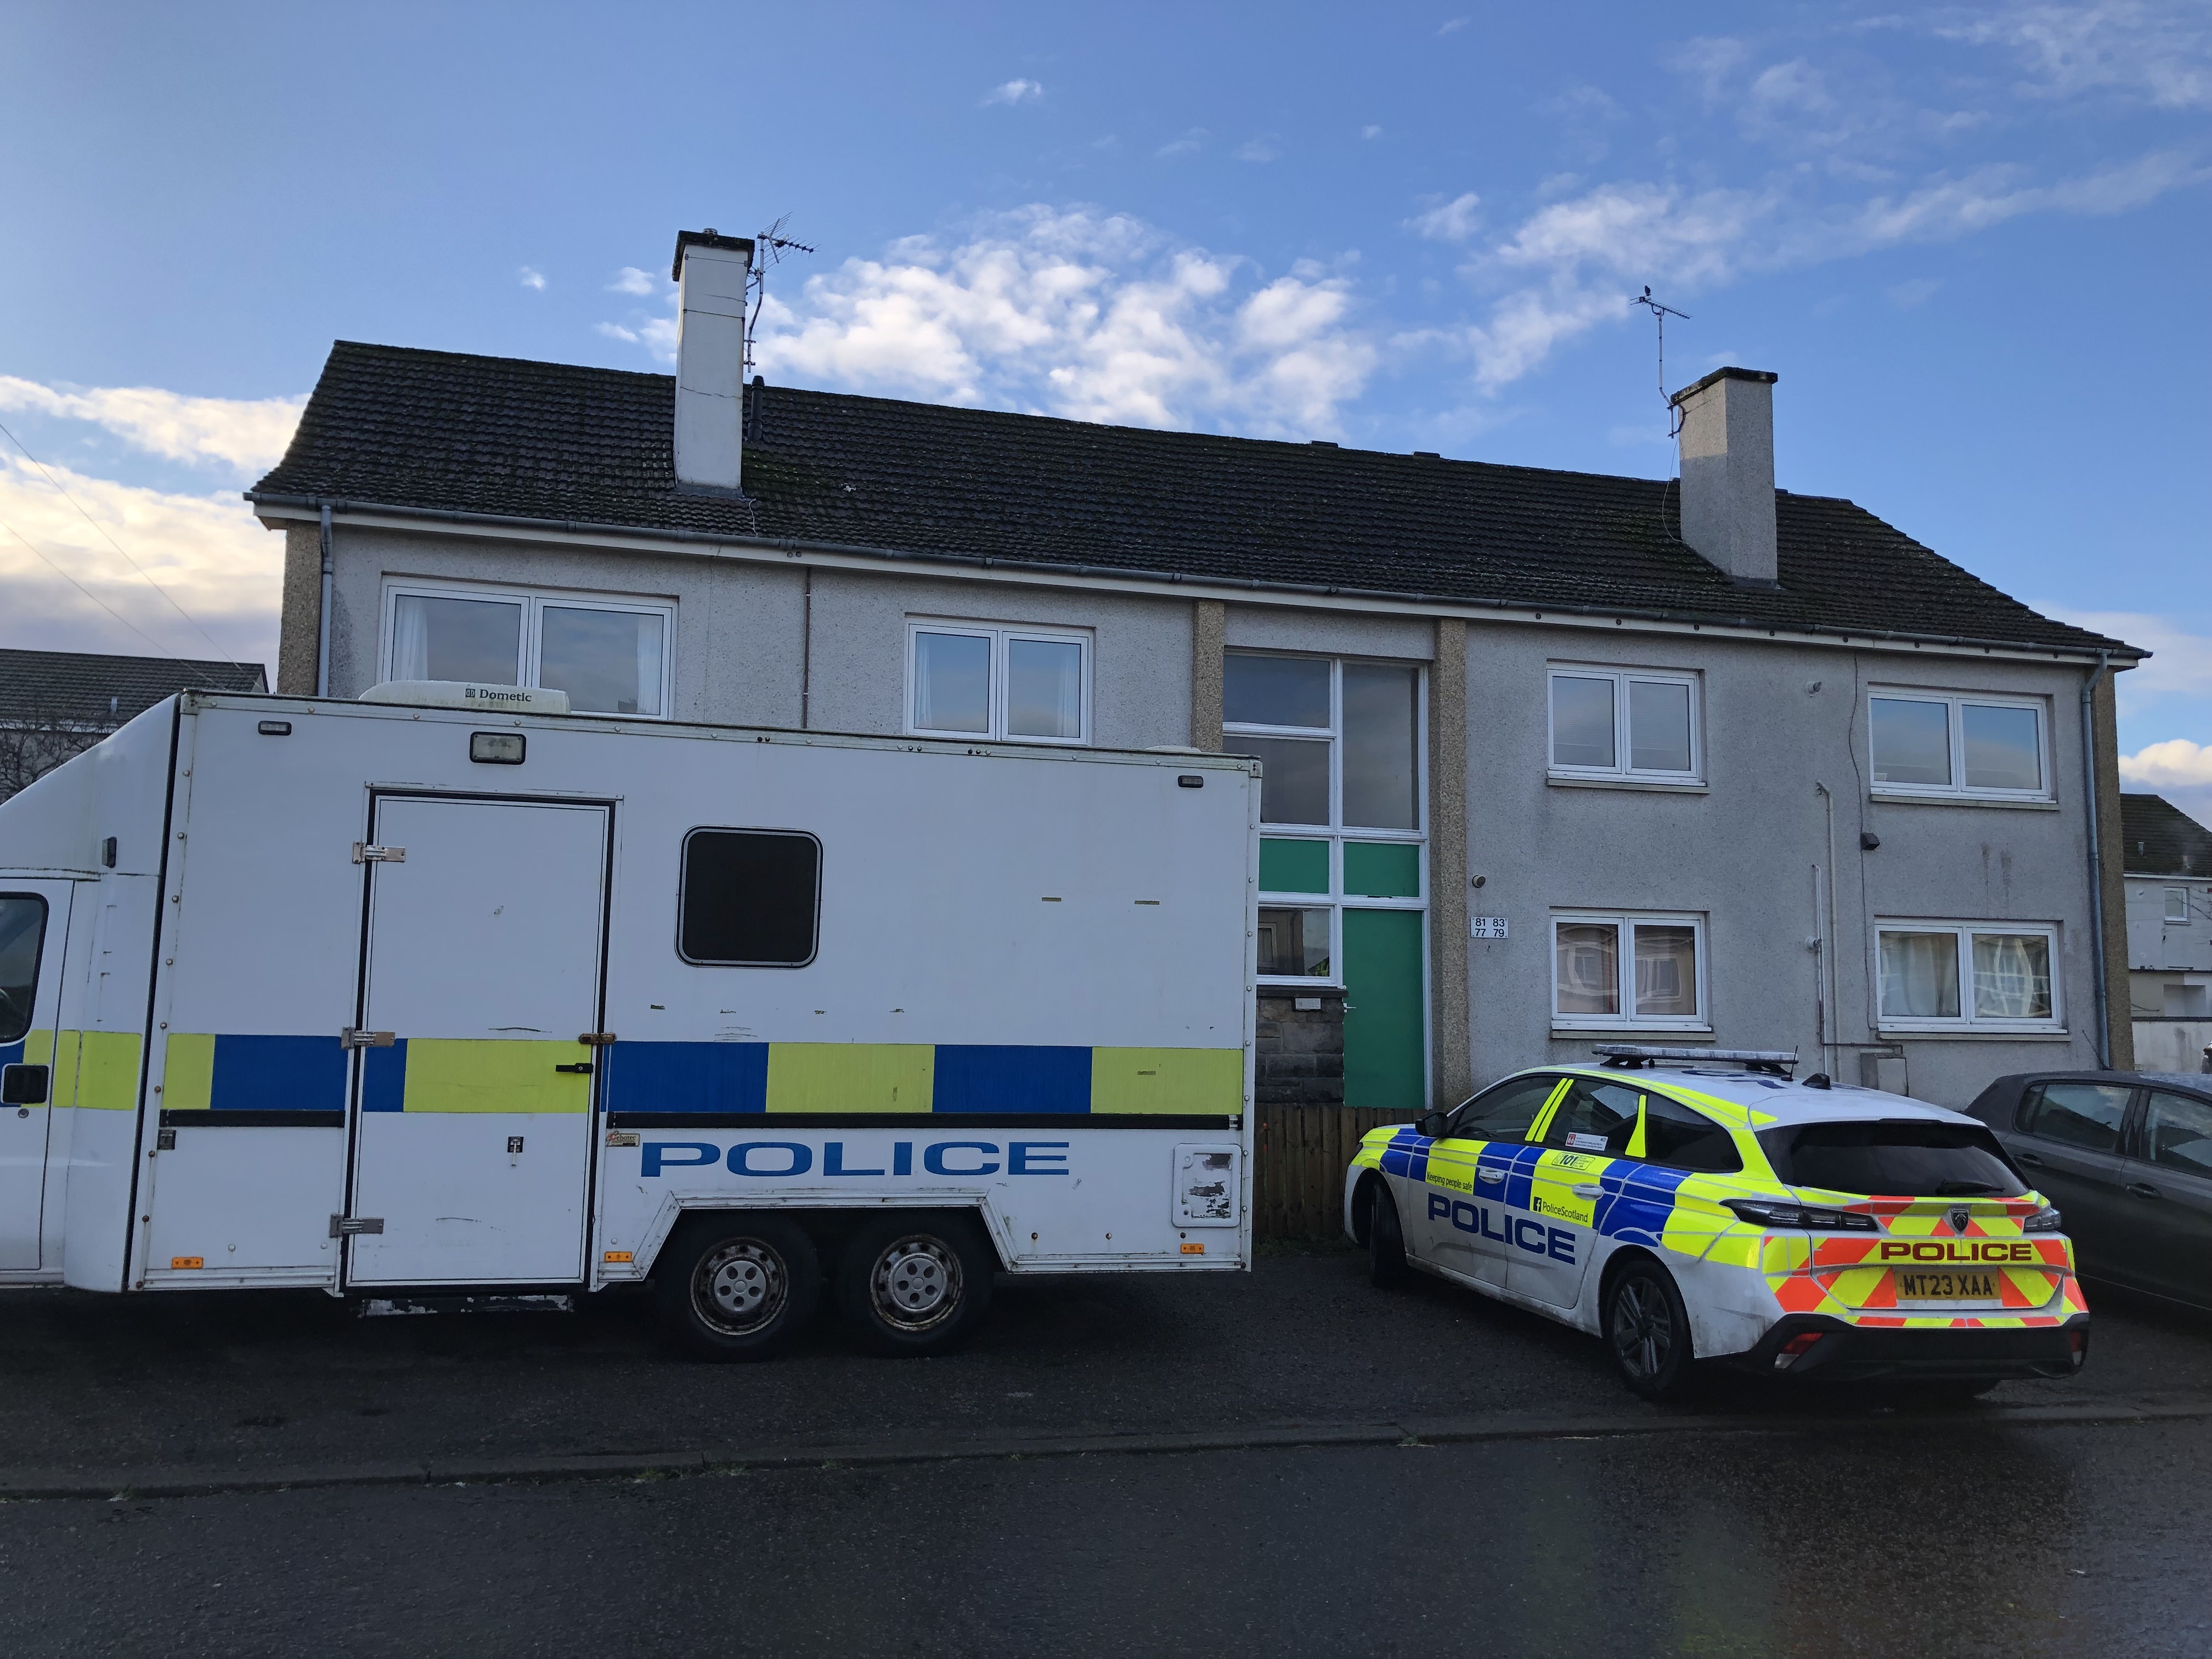 Lucretia, known as Kiesha, Donaghy, 32, was found dead at Anderson Drive, Elgin, at around 7.20pm on Thursday, November 16